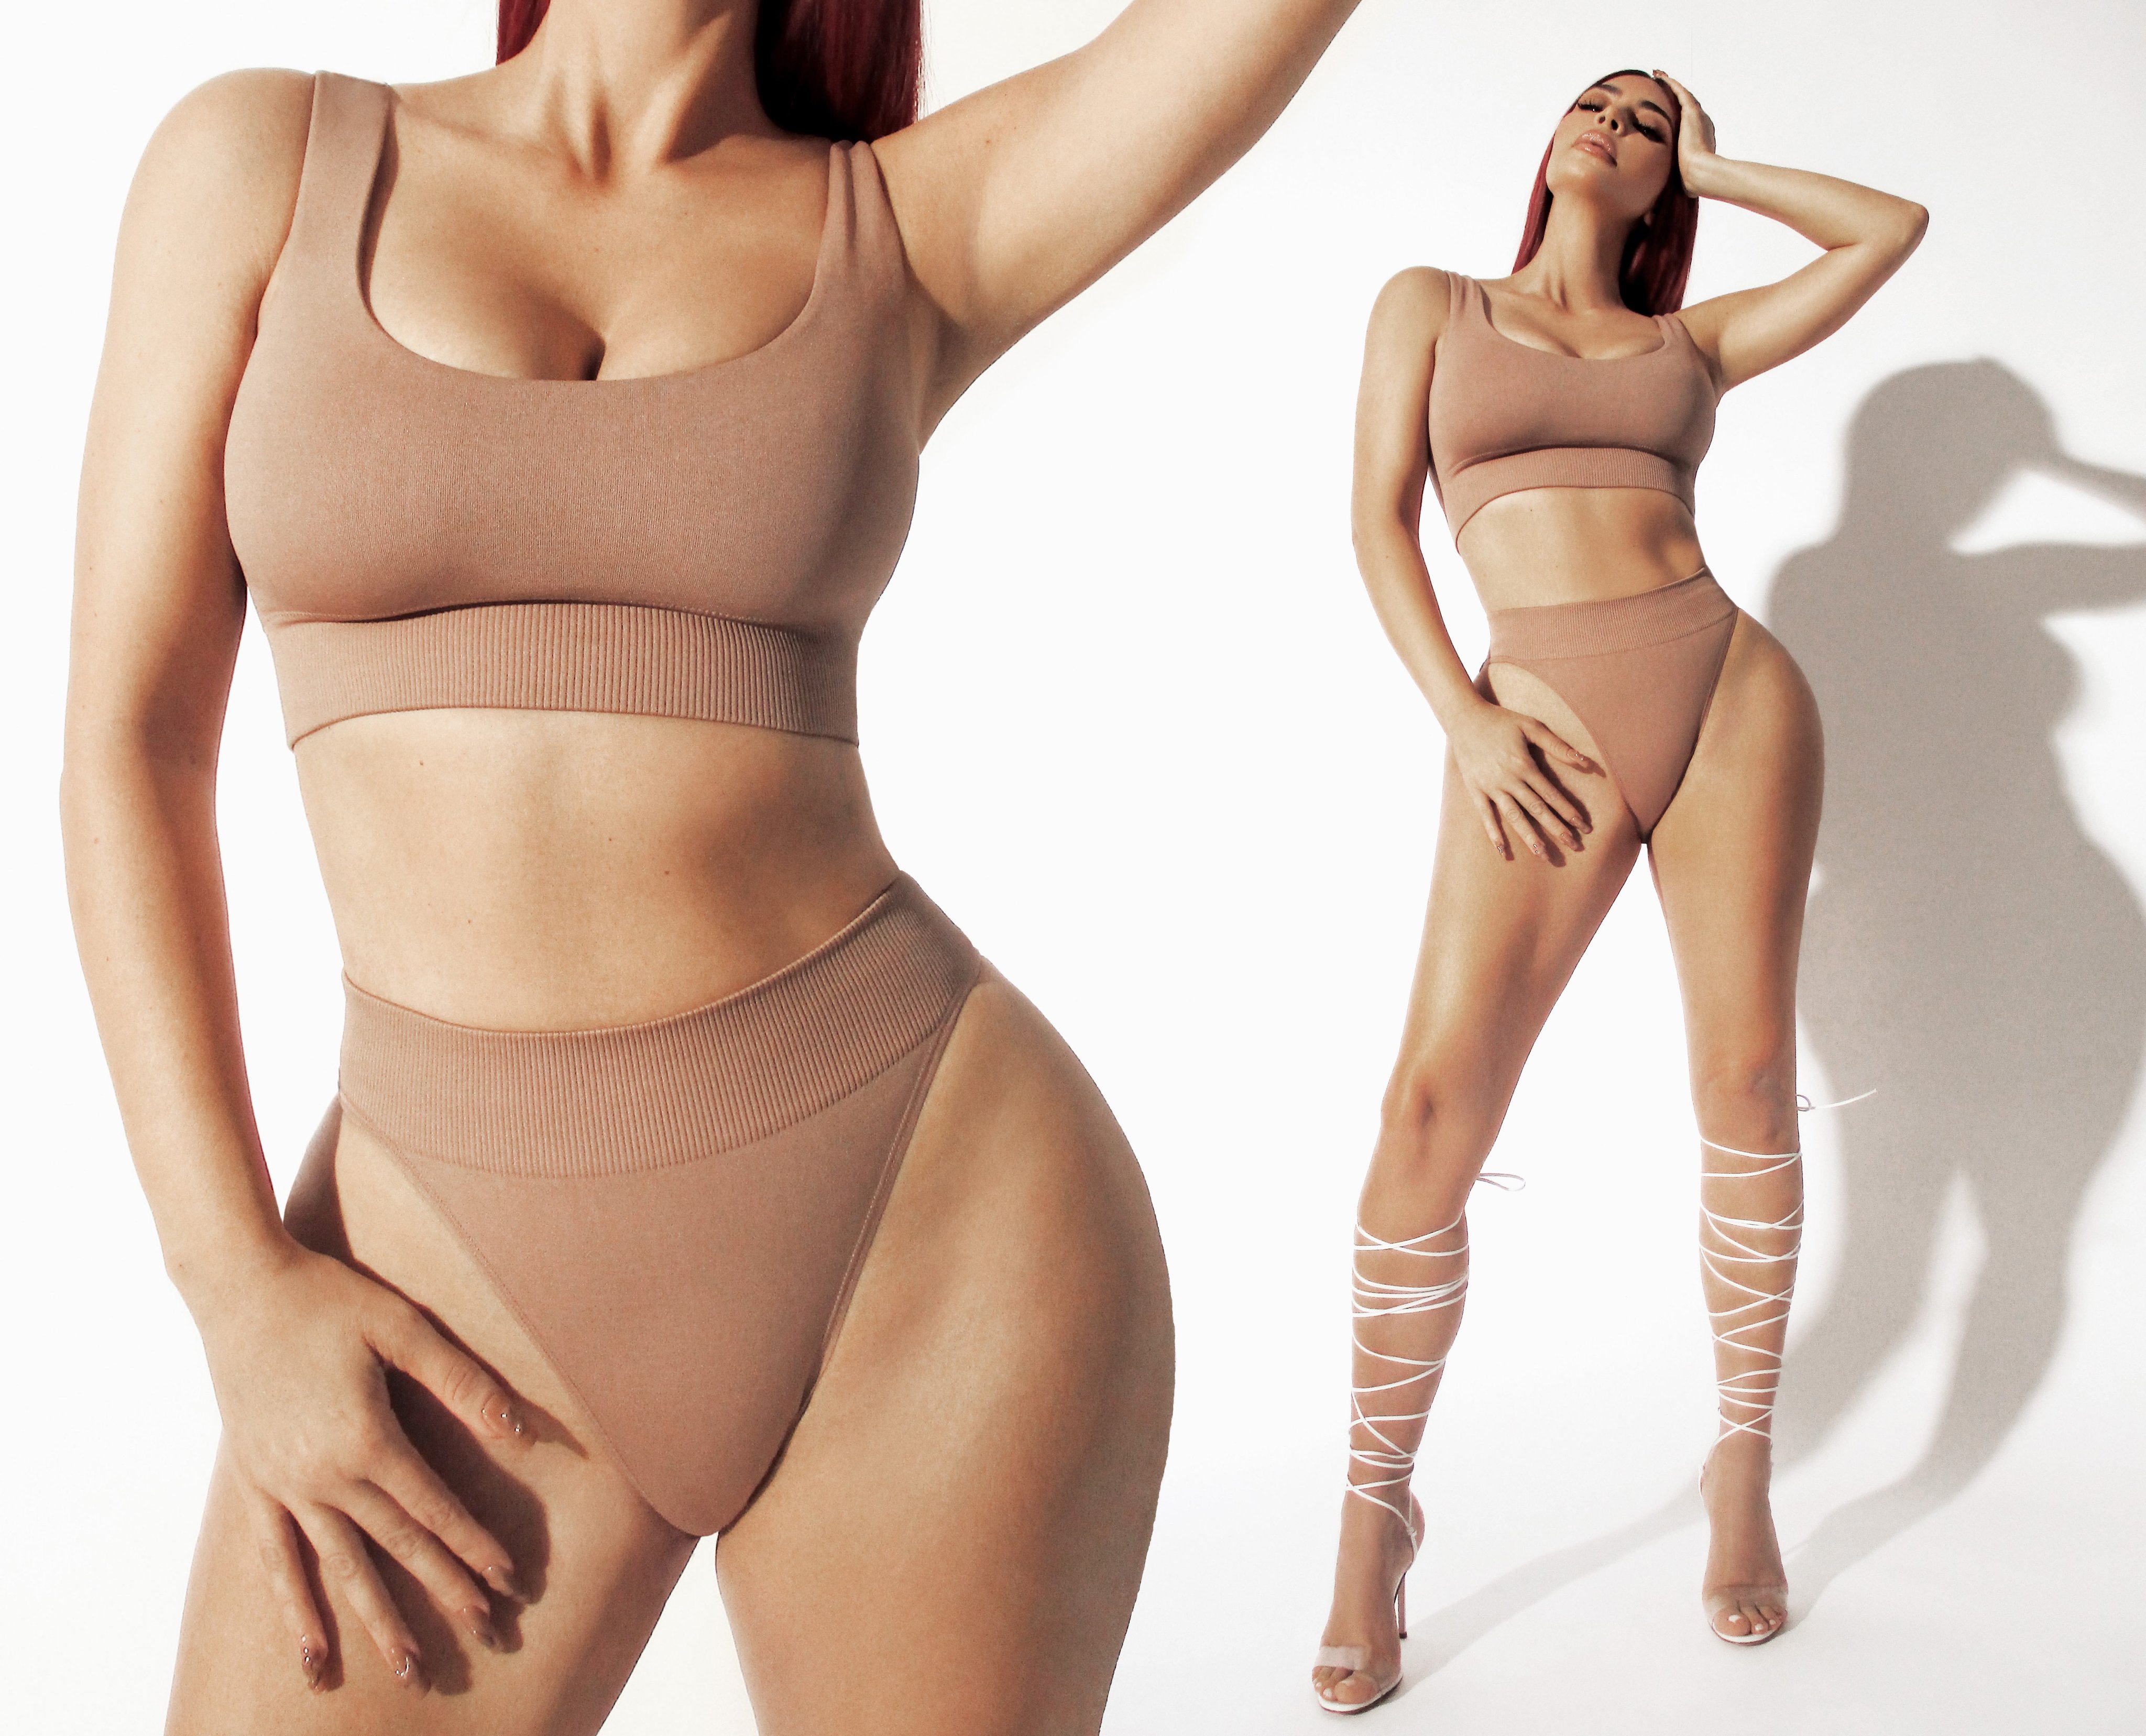 SKIMS on X: JUST DROPPED: SKIMS BODY — sleek and sexy basics to take you  through summer in style. Available now in 4 colors and in sizes XXS - 4X.  Shop SKIMS